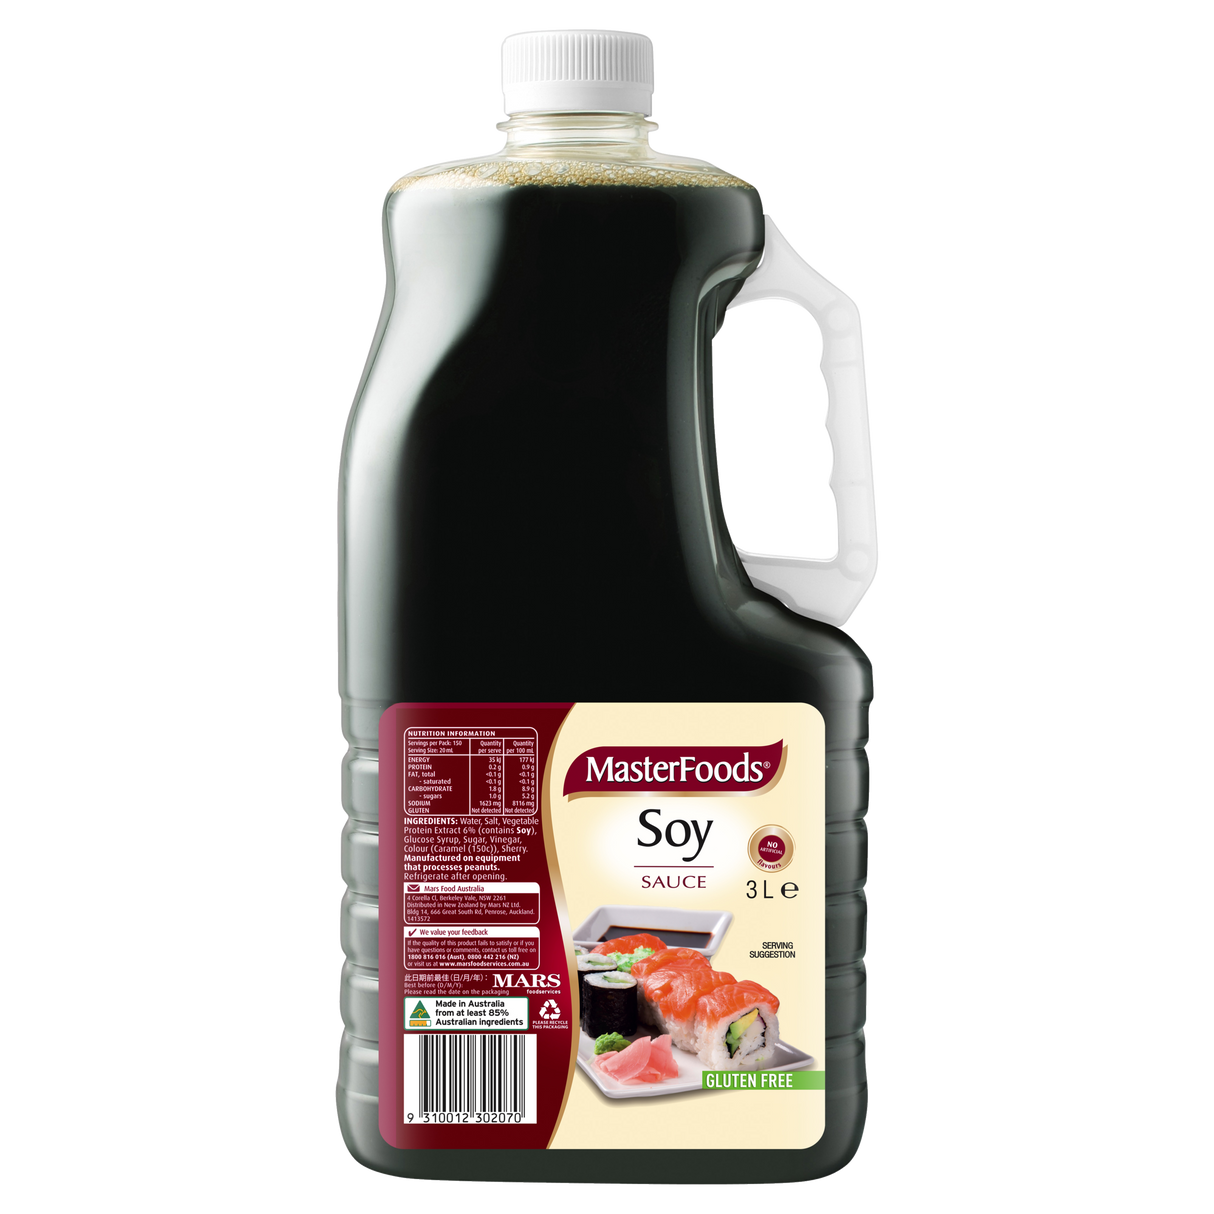 MasterFoods Soy Sauce Gluten Free 3l